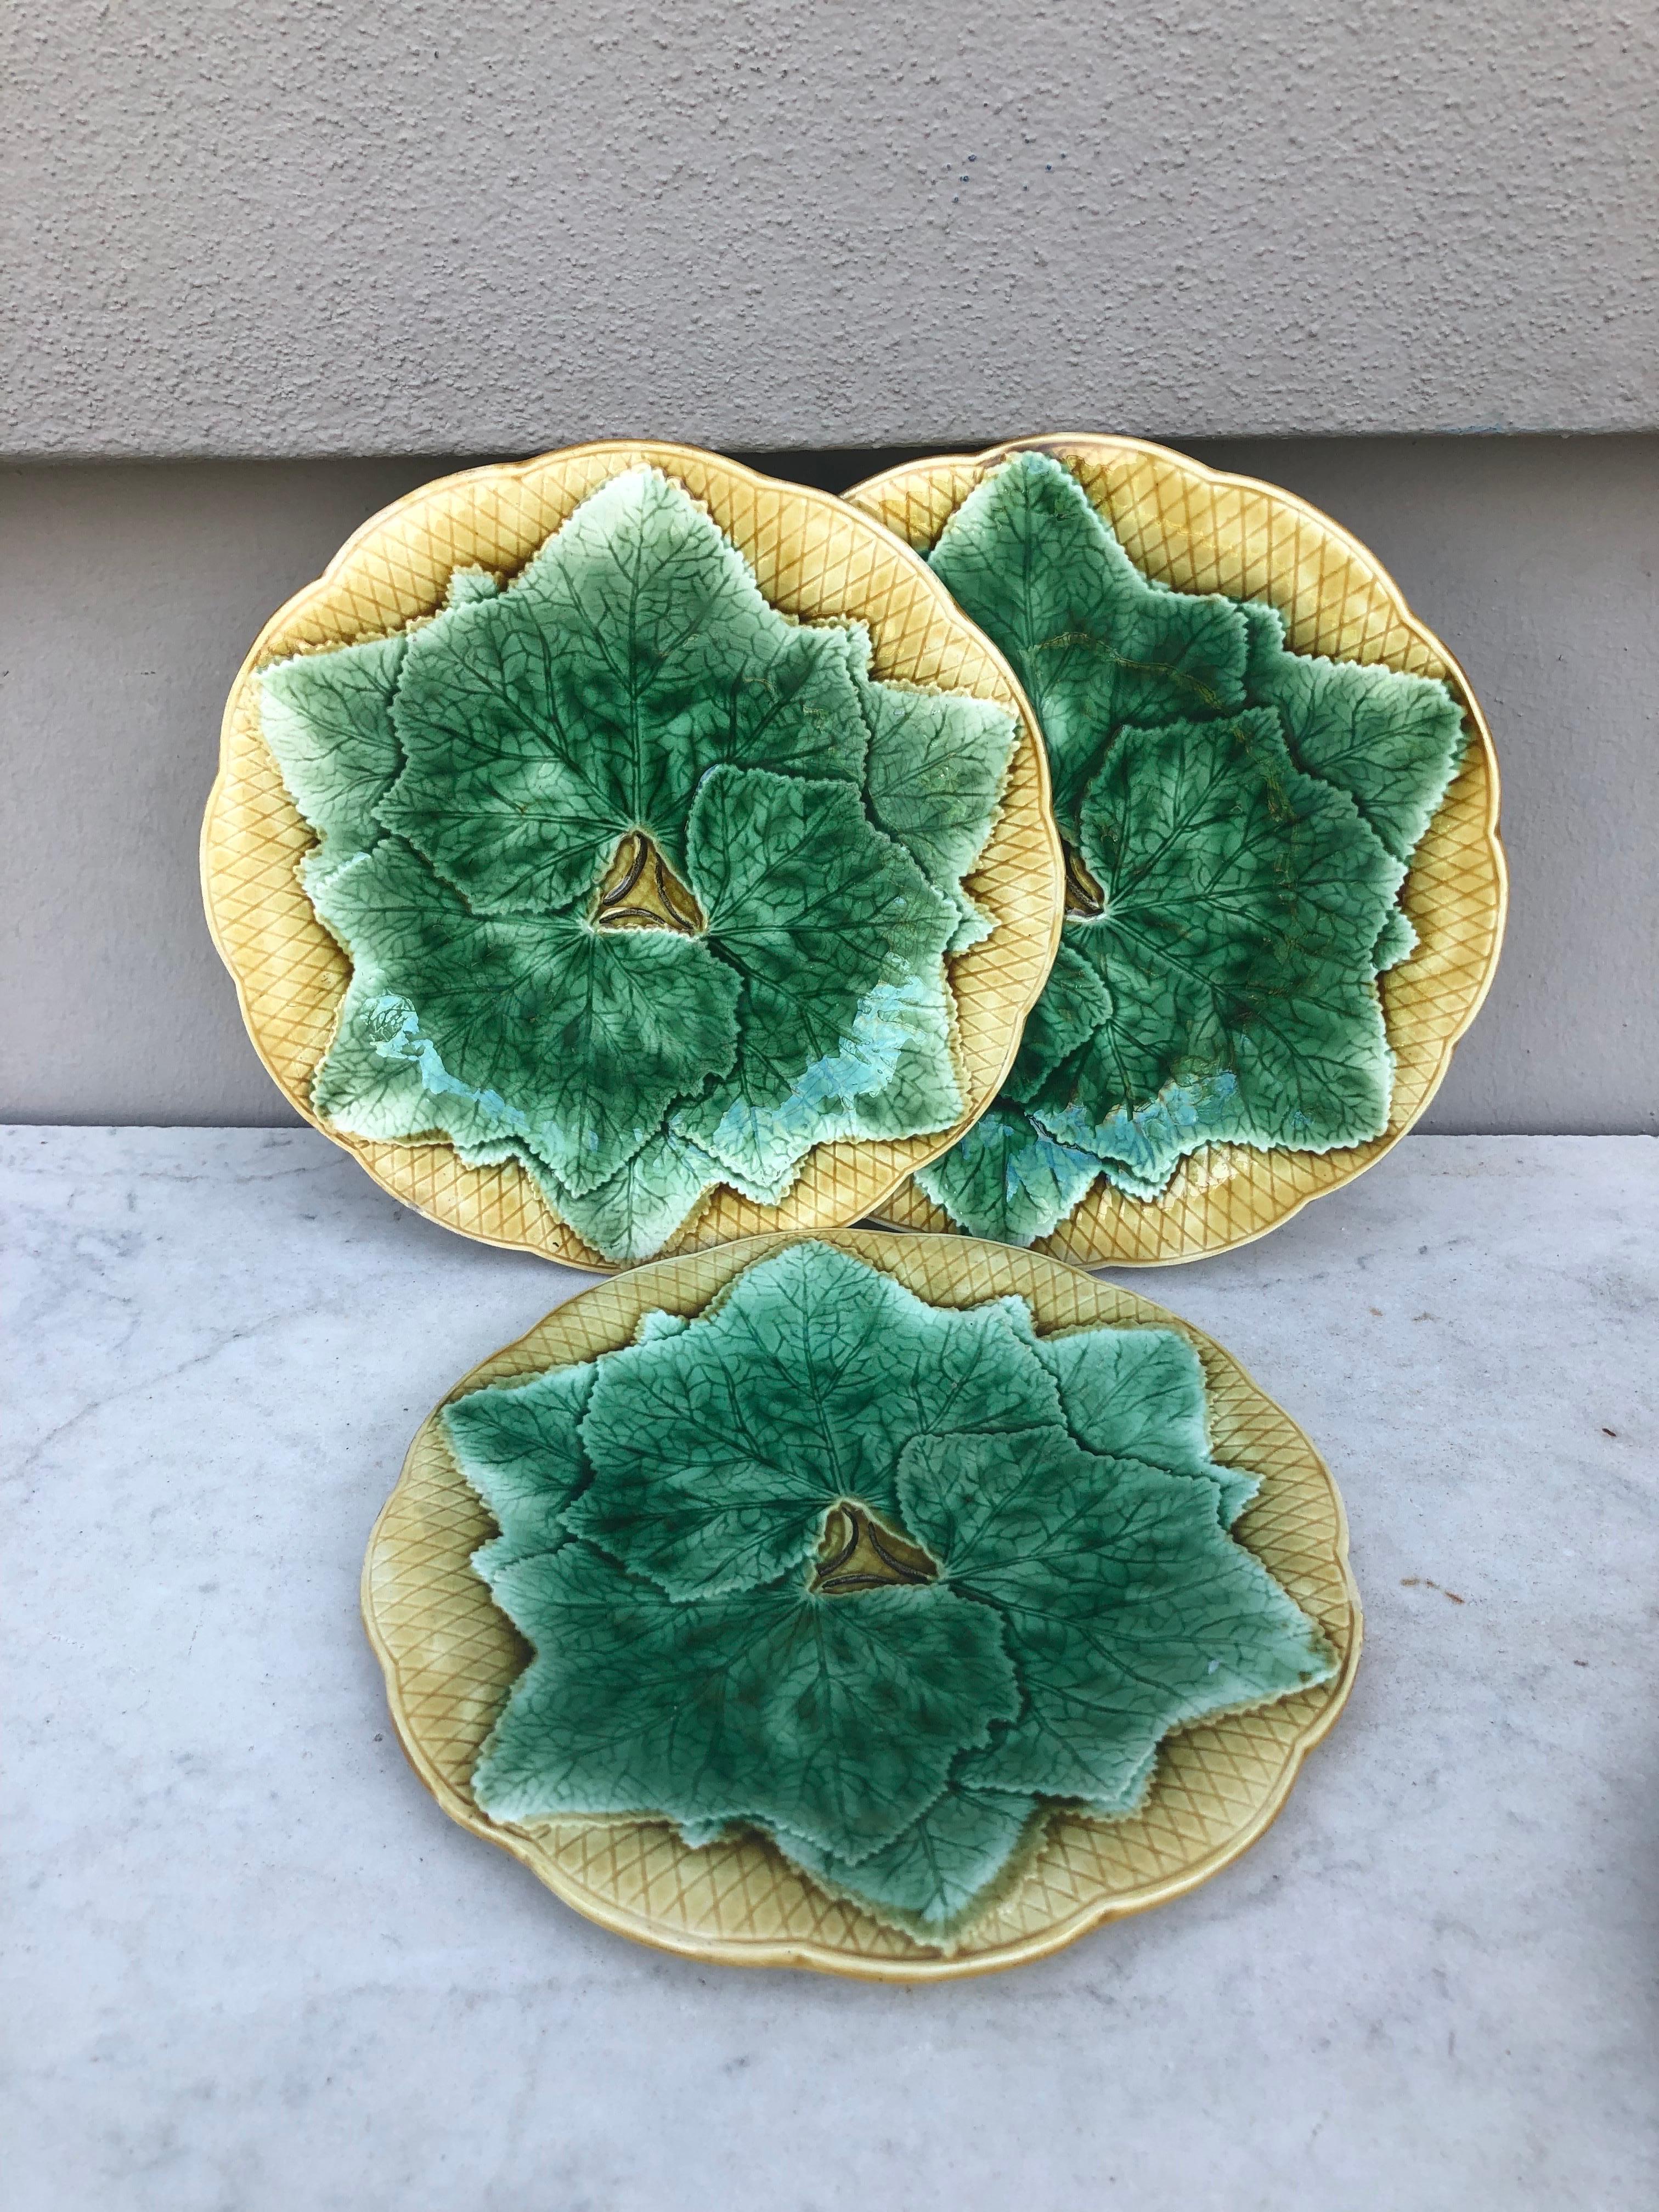 French Majolica leaves plate Gien, circa 1880.
Green leaves on a yellow background basketweave.